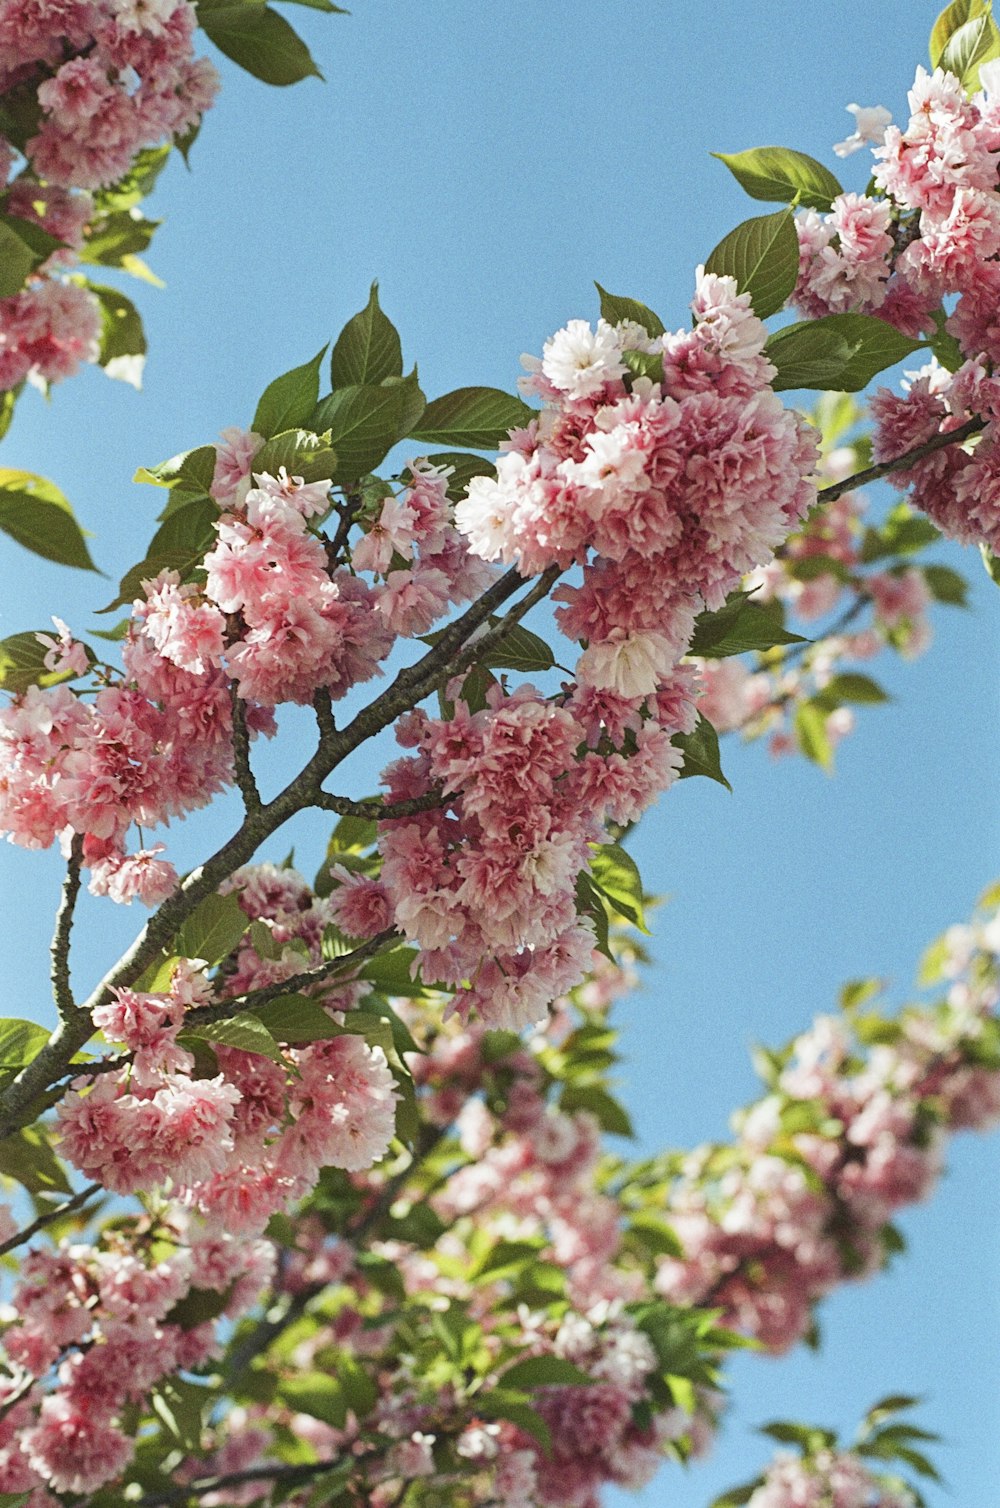 pink and white flowers on tree branch